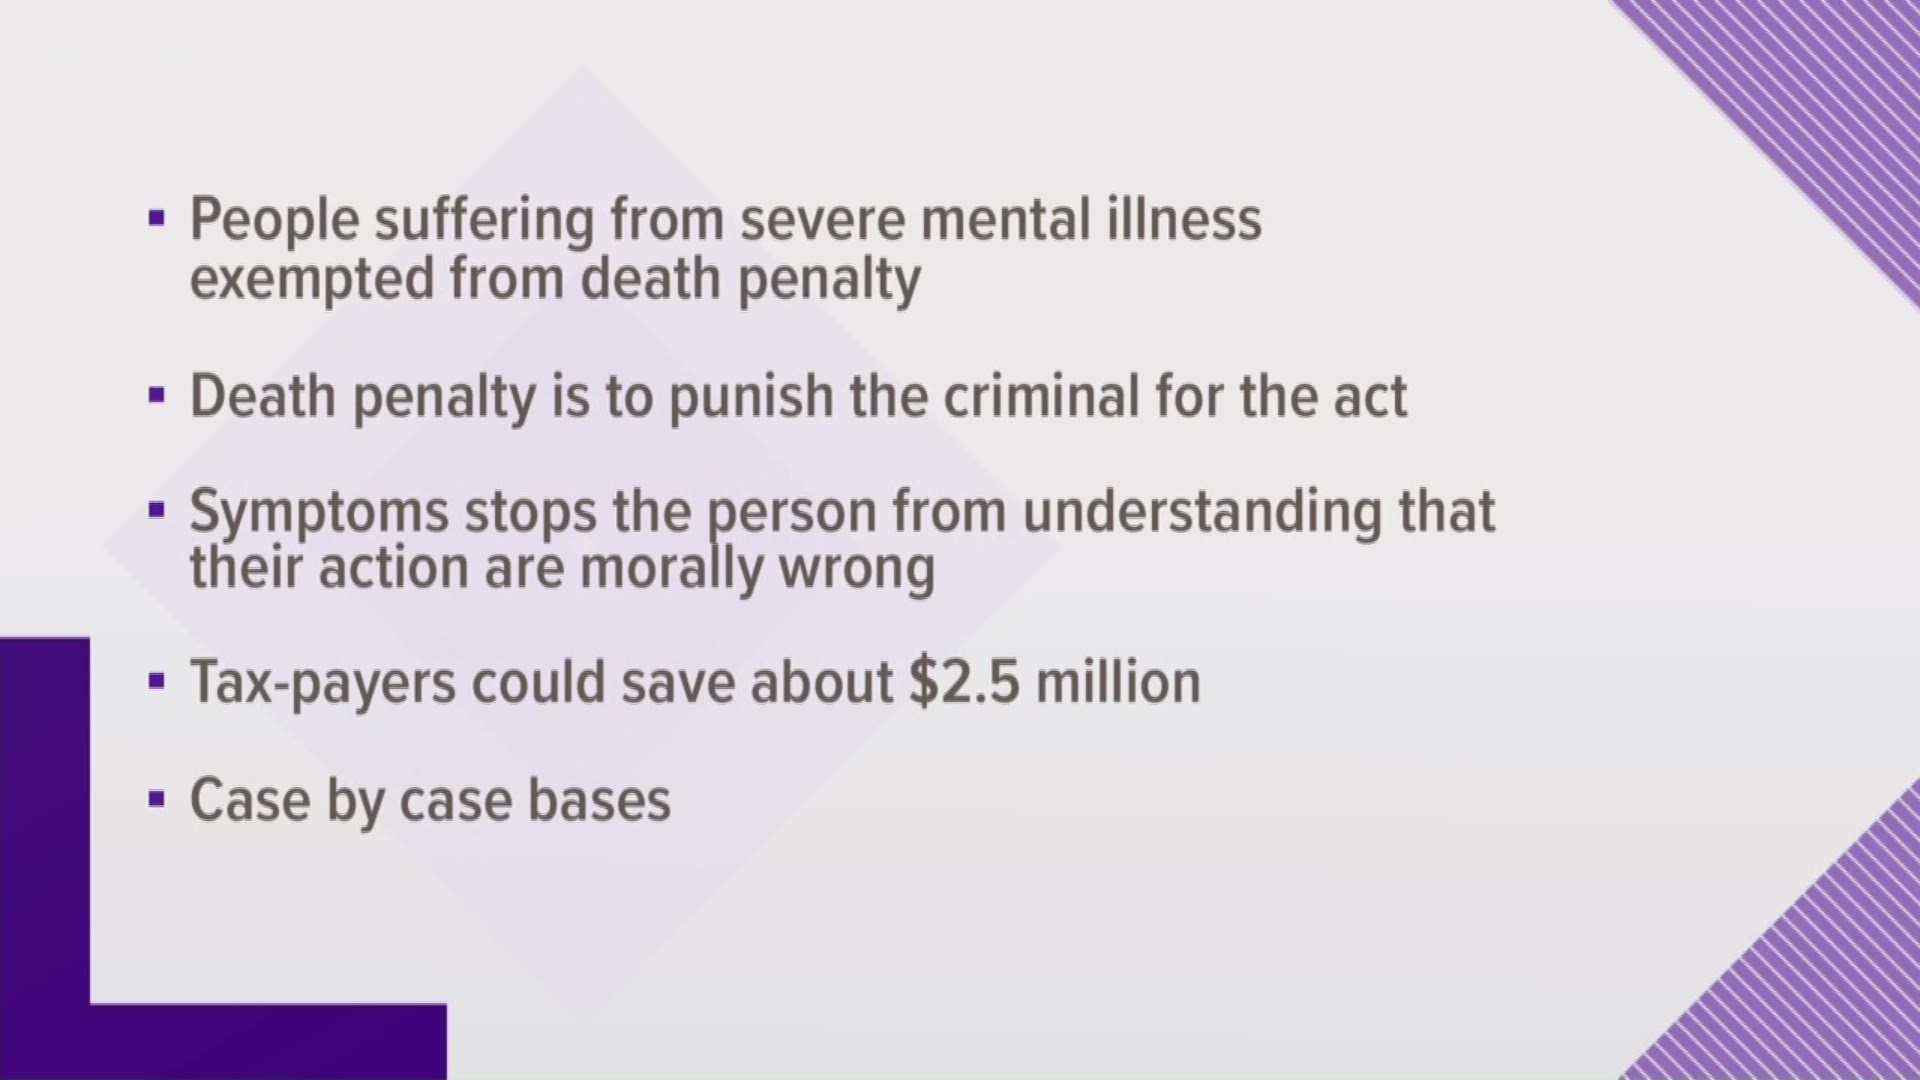 A new bill filed Tuesday would exempt people suffering from a severe mental illness from the death penalty.